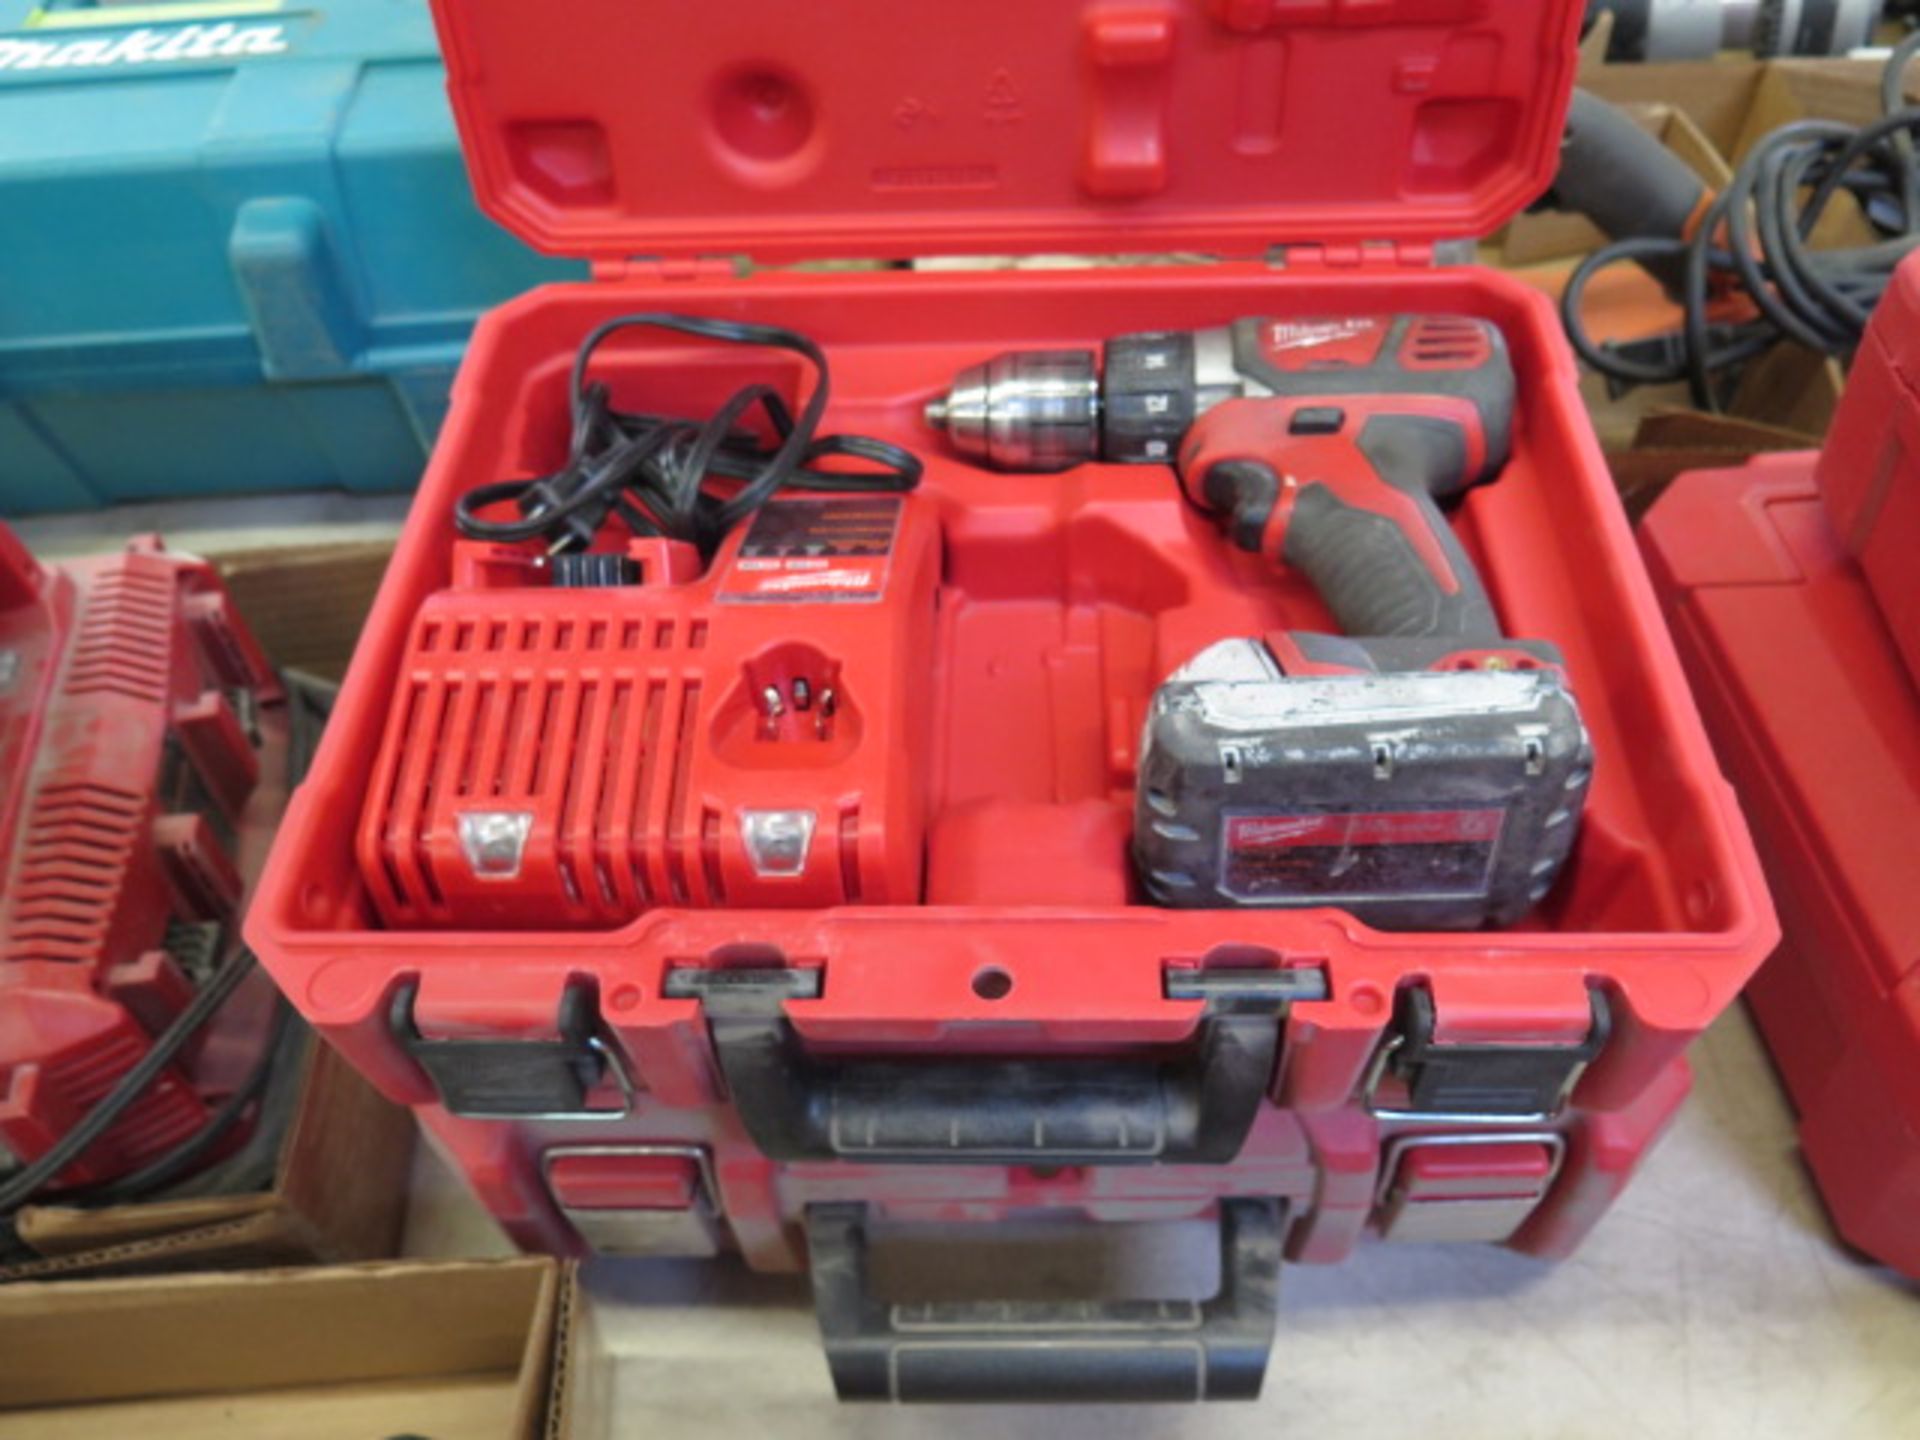 Milwaukee 18Volt Drill Kits (2) w/ Chargers (SOLD AS-IS - NO WARRANTY) - Image 2 of 5